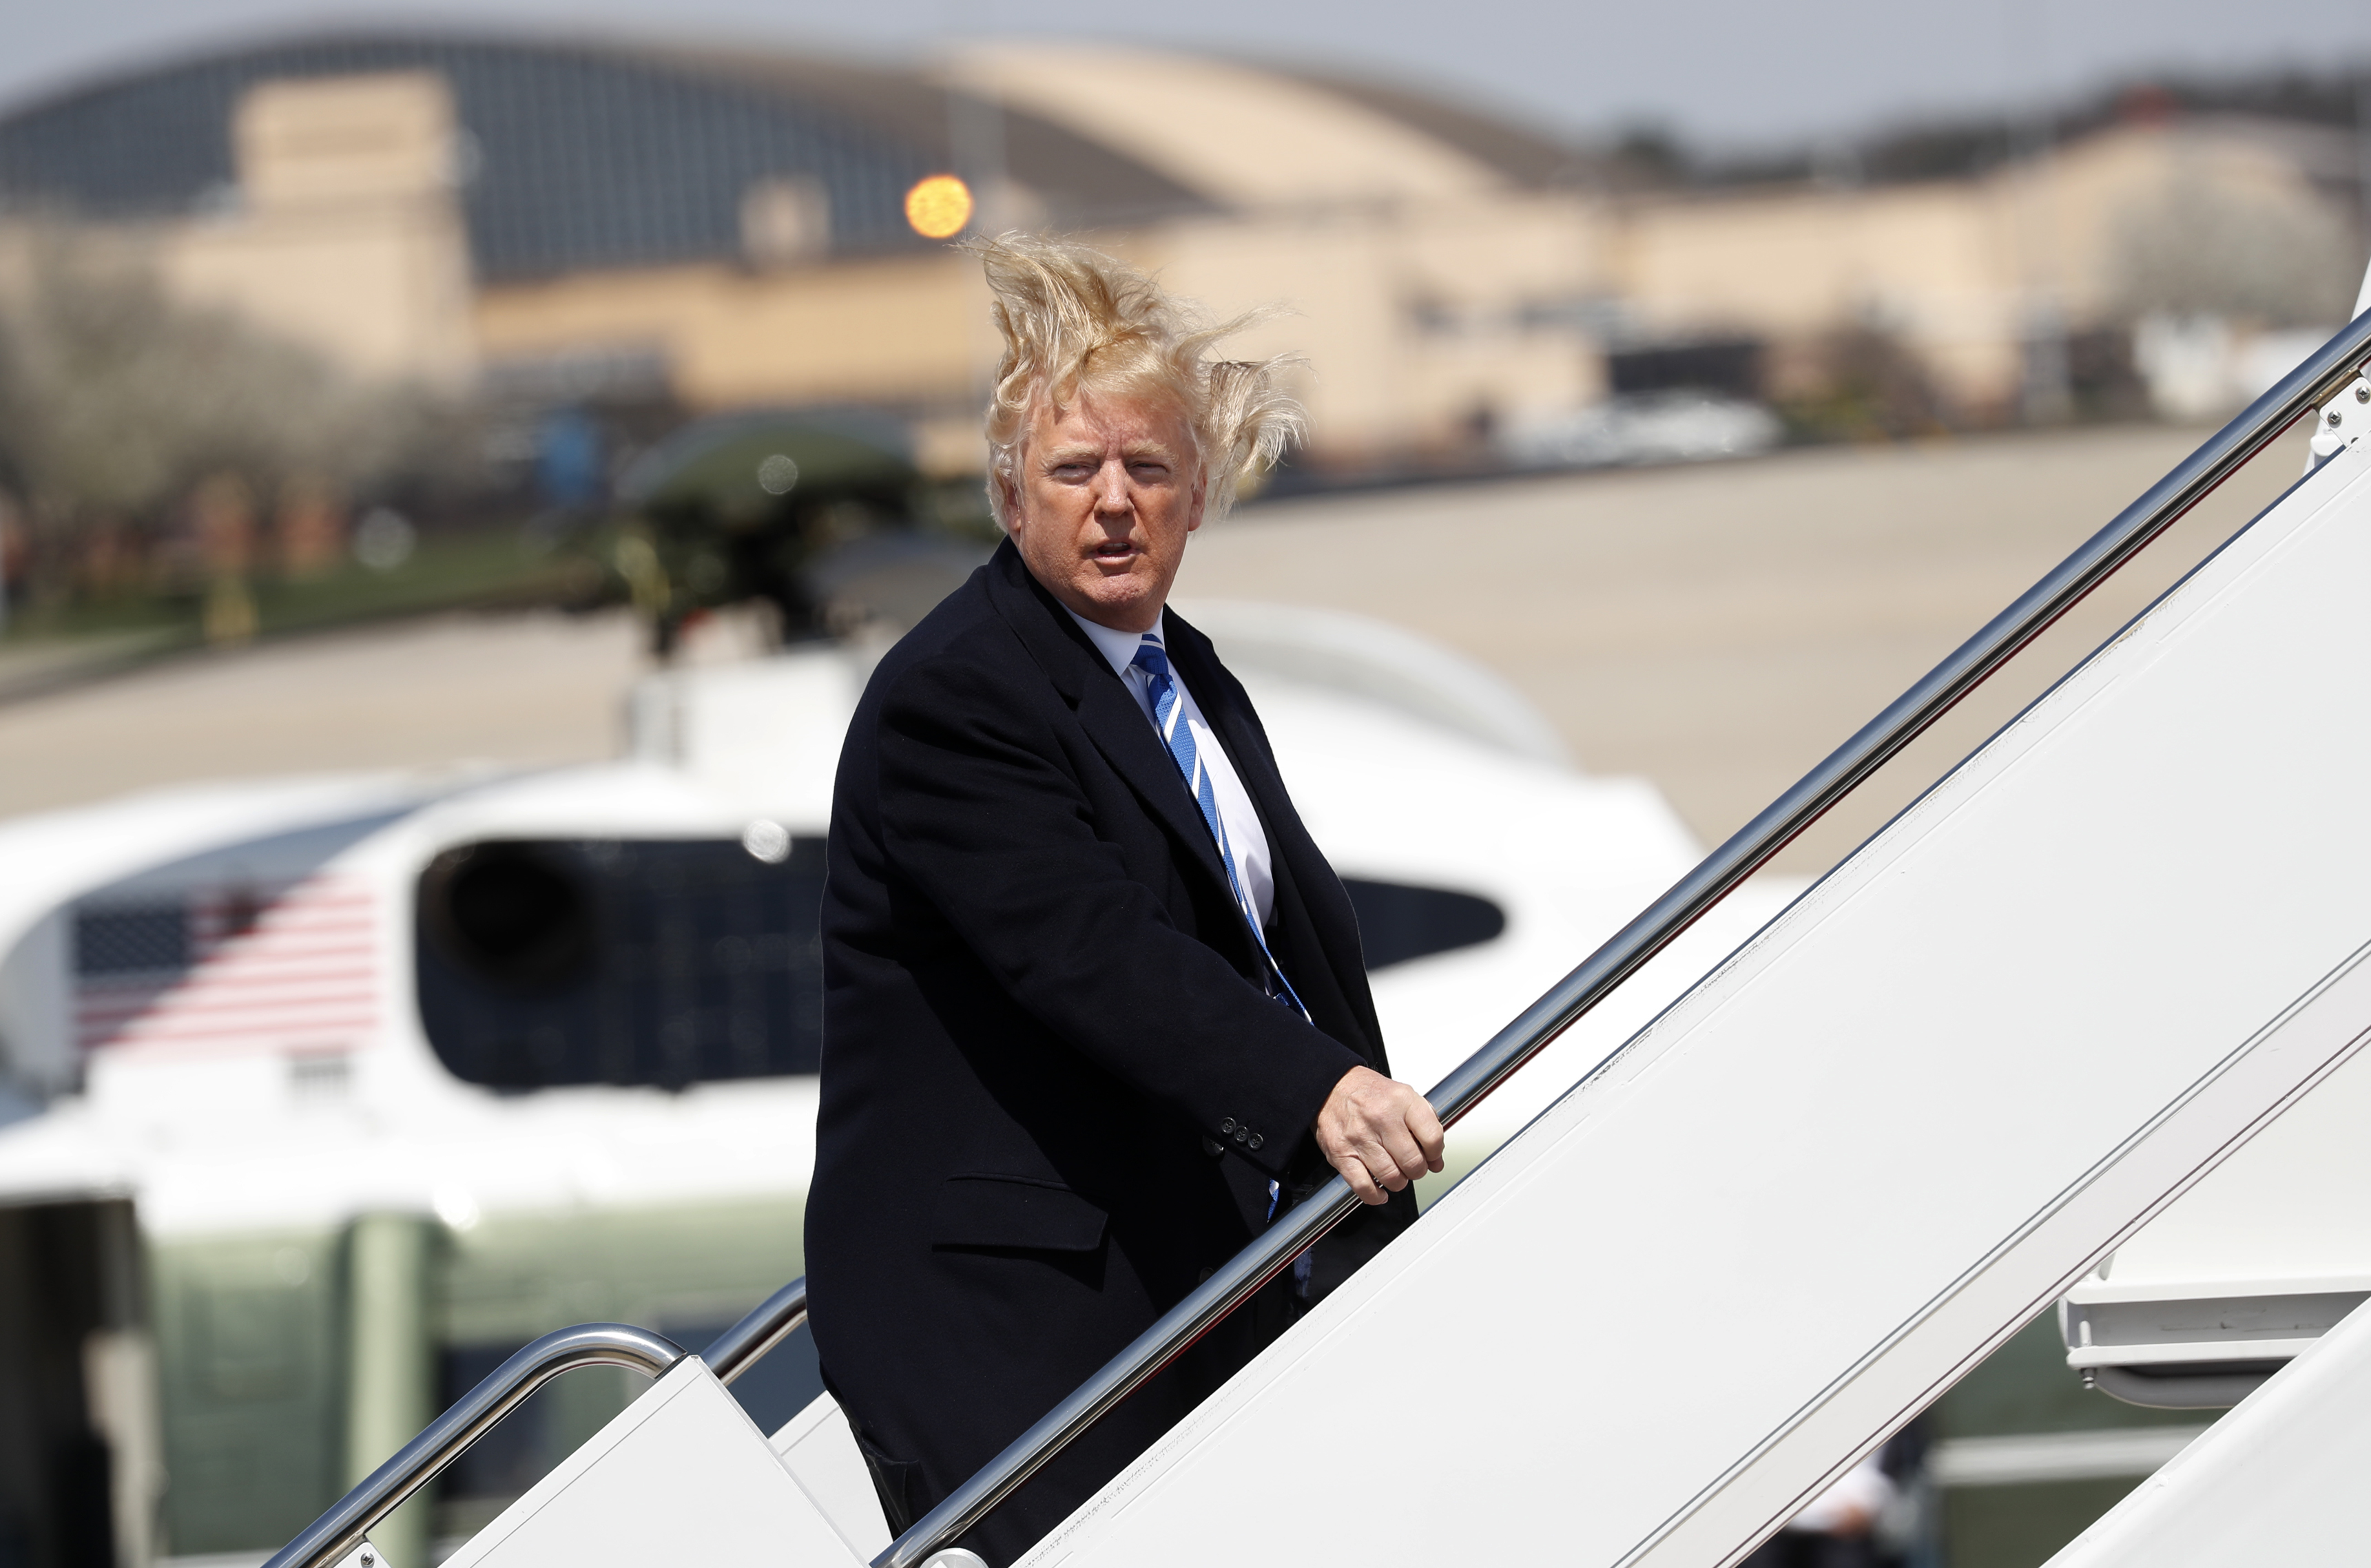 U.S. President Donald Trump yells over to members of the news media as he boards Air Force One on a windy day at Joint Base Andrews, Maryland before departing en route to an event in West Virginia, U.S., April 5, 2018. (REUTERS/Kevin Lamarque)